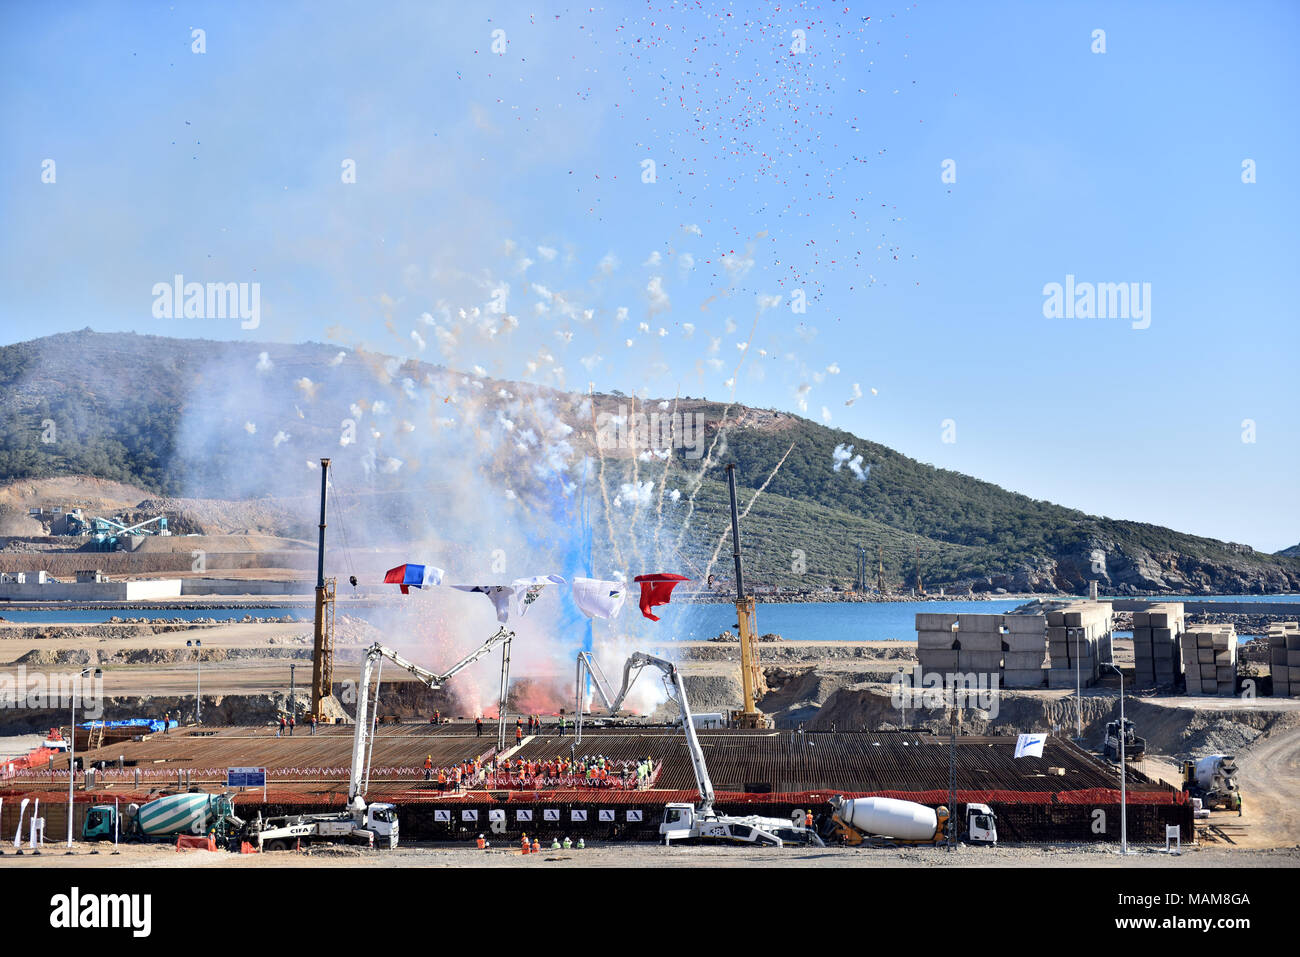 Mersin. 4th Apr, 2018. Photo taken on April 3, 2018 shows a view of the groundbreaking ceremony of Akkuyu Nuclear Power Plant in Mersin, Turkey. The groundbreaking ceremony of Turkey's first nuclear power plant, Akkuyu Nuclear Power Plant, was held Tuesday in Turkey's southern Mersin province with the participation of Turkish and Russian presidents via video teleconference from Ankara. Credit: Xinhua/Alamy Live News Stock Photo